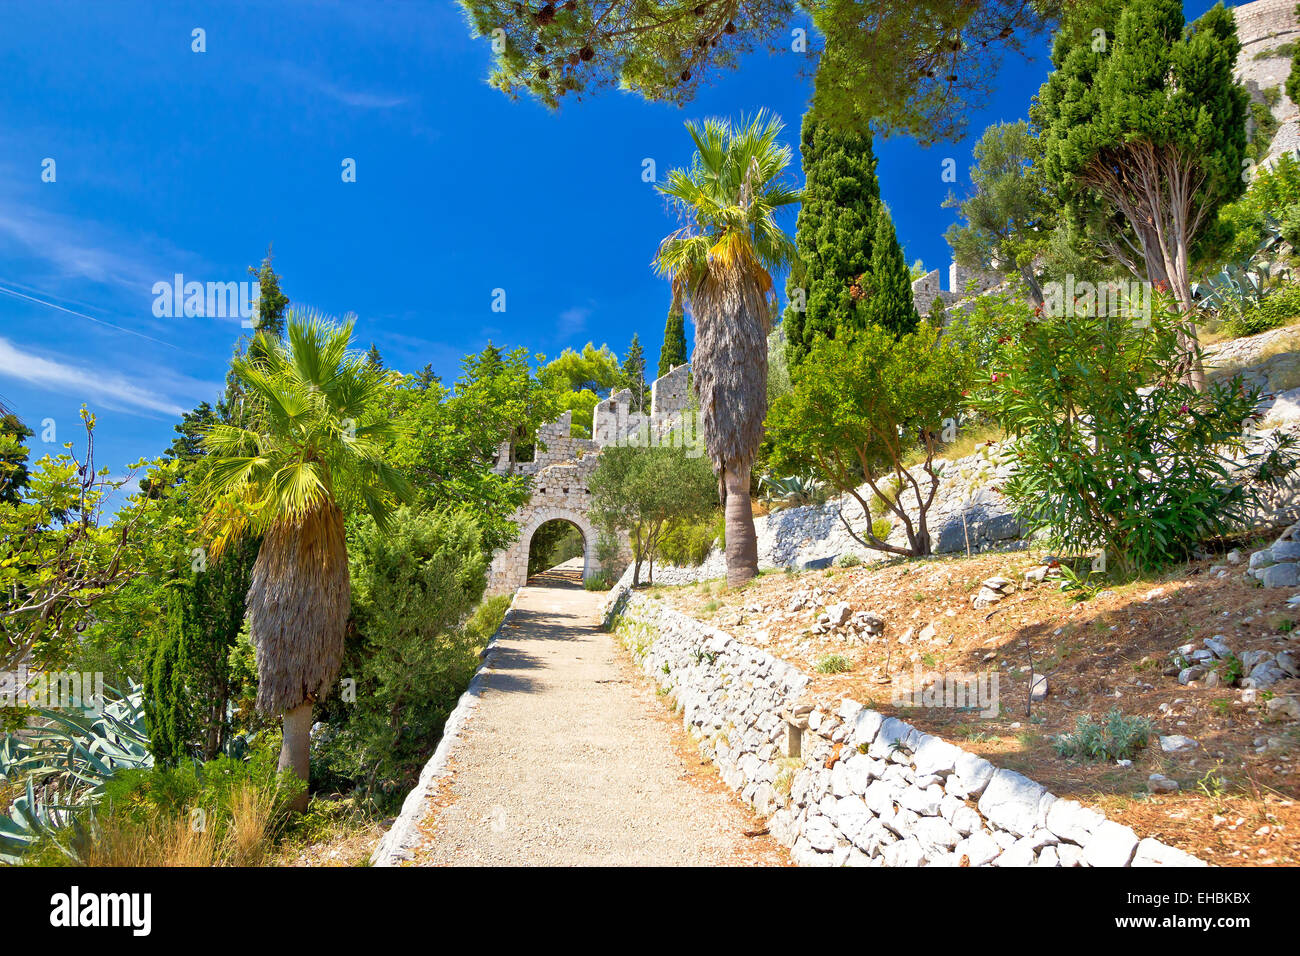 Historic Hvar fortification wall in nature Stock Photo